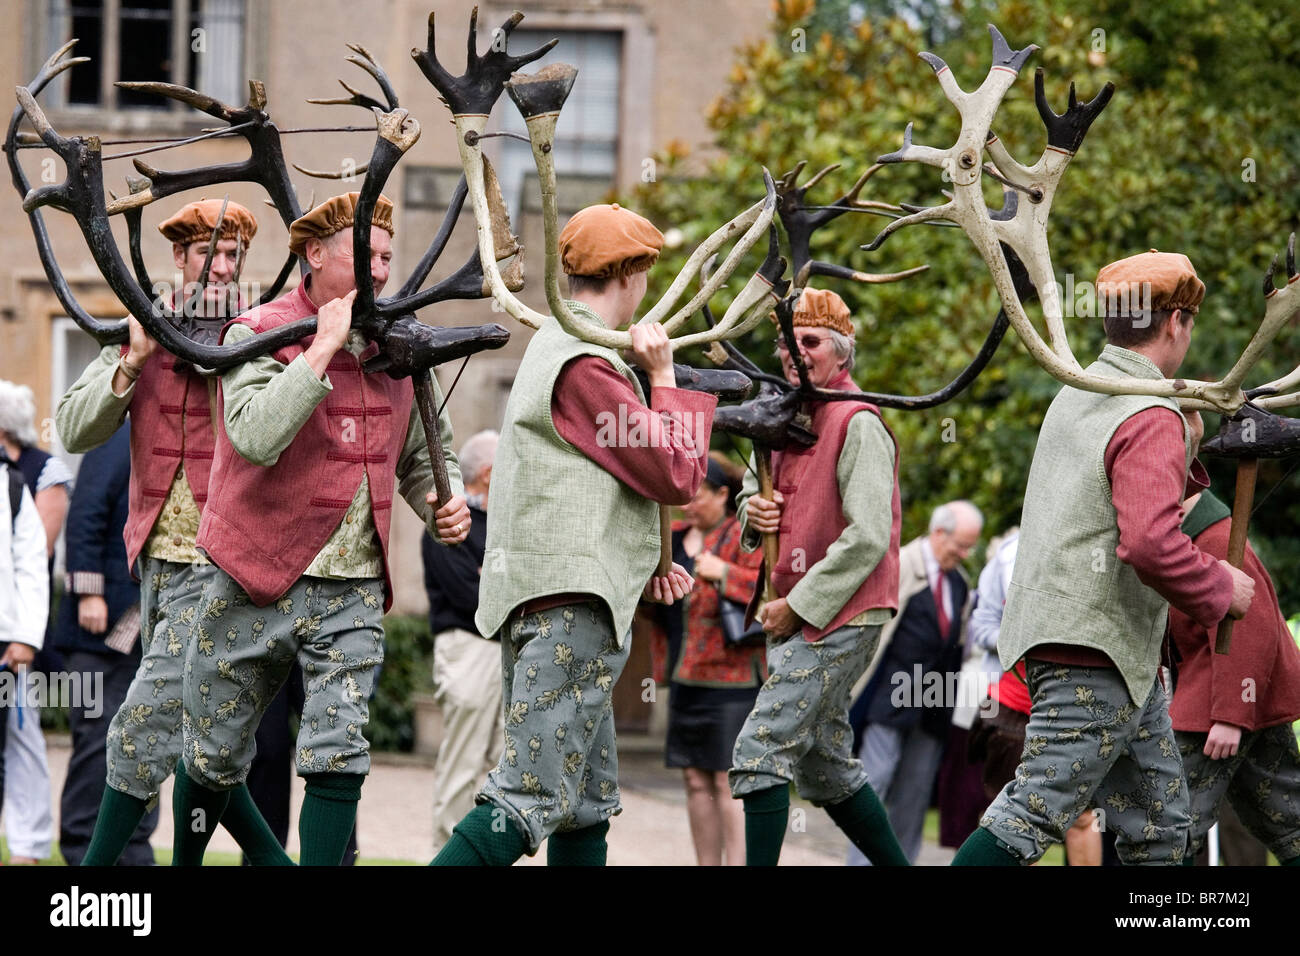 The Abbot's Bromley Horn Dance, Blithfield Hall, Staffordshire, England Stock Photo